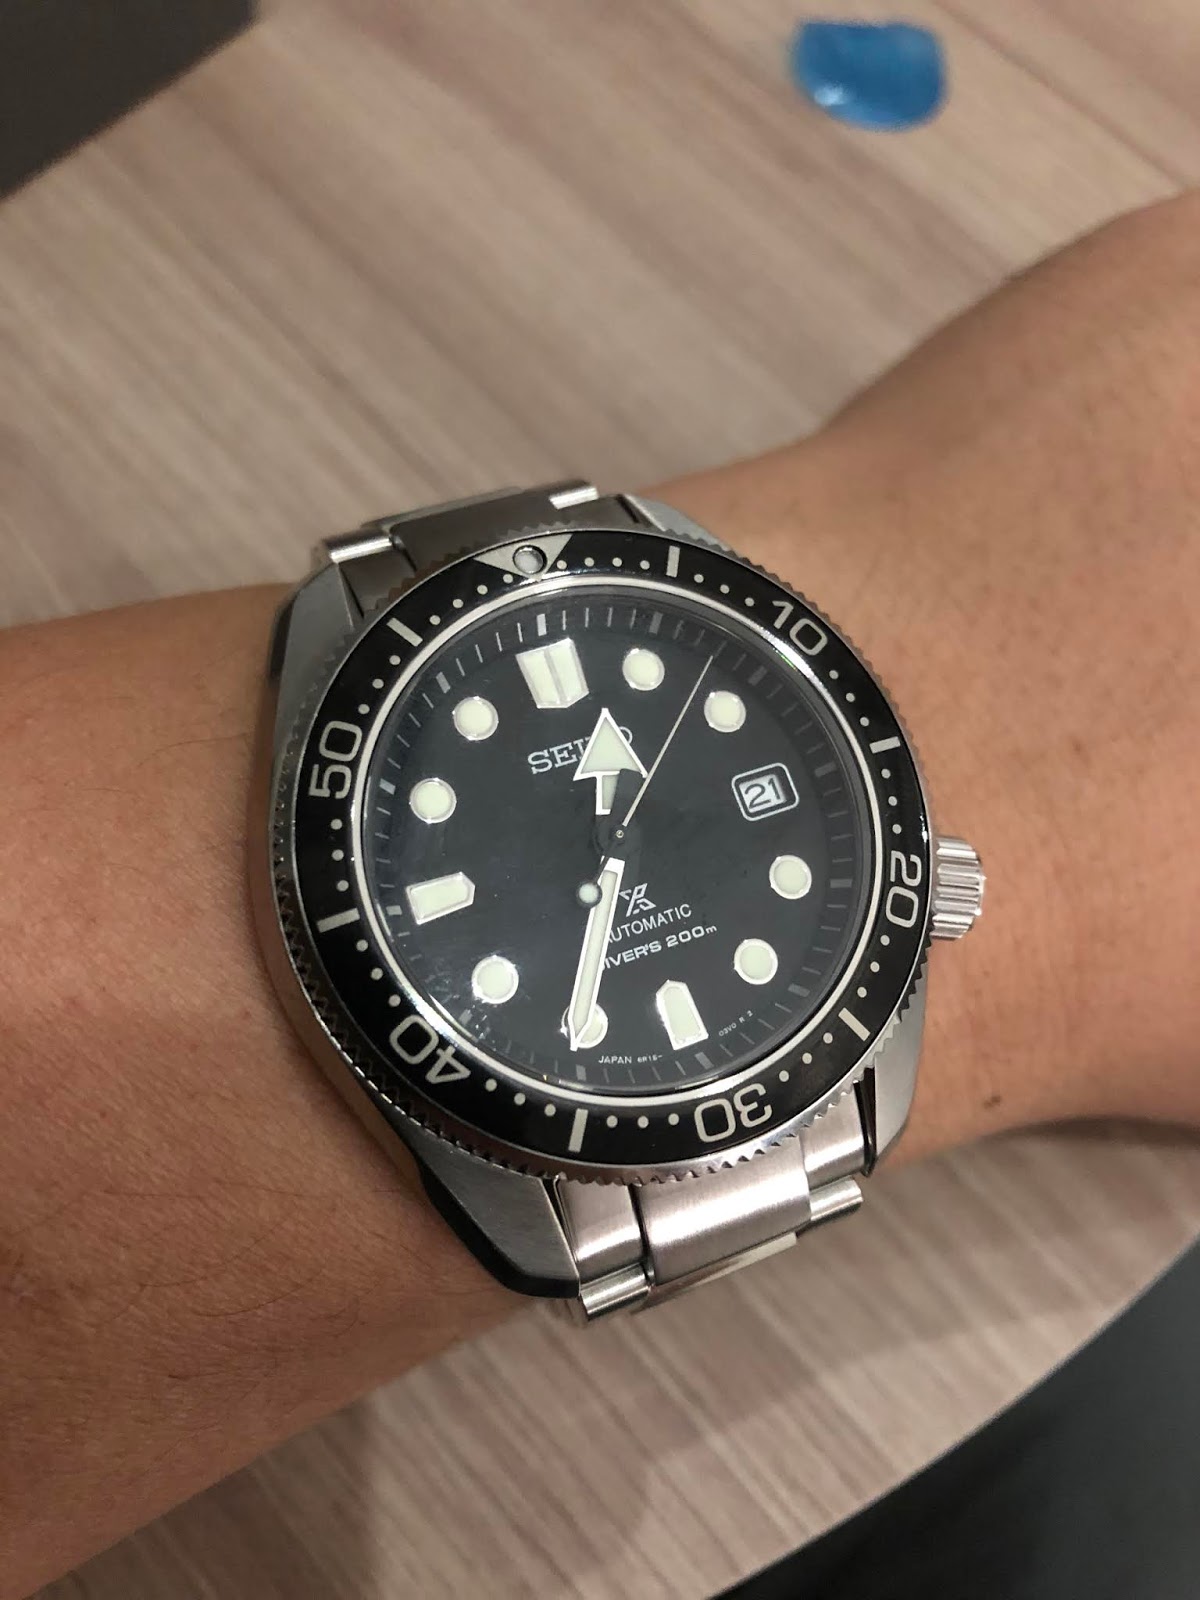 My Eastern Watch Collection Seiko Prospex Jdm Baby Marinemaster 0 Meter Diver Sbdc061 Similar To Sbdc063 Or Spb077 Spb079 Similar To A Seiko Sumo A Review Plus Video